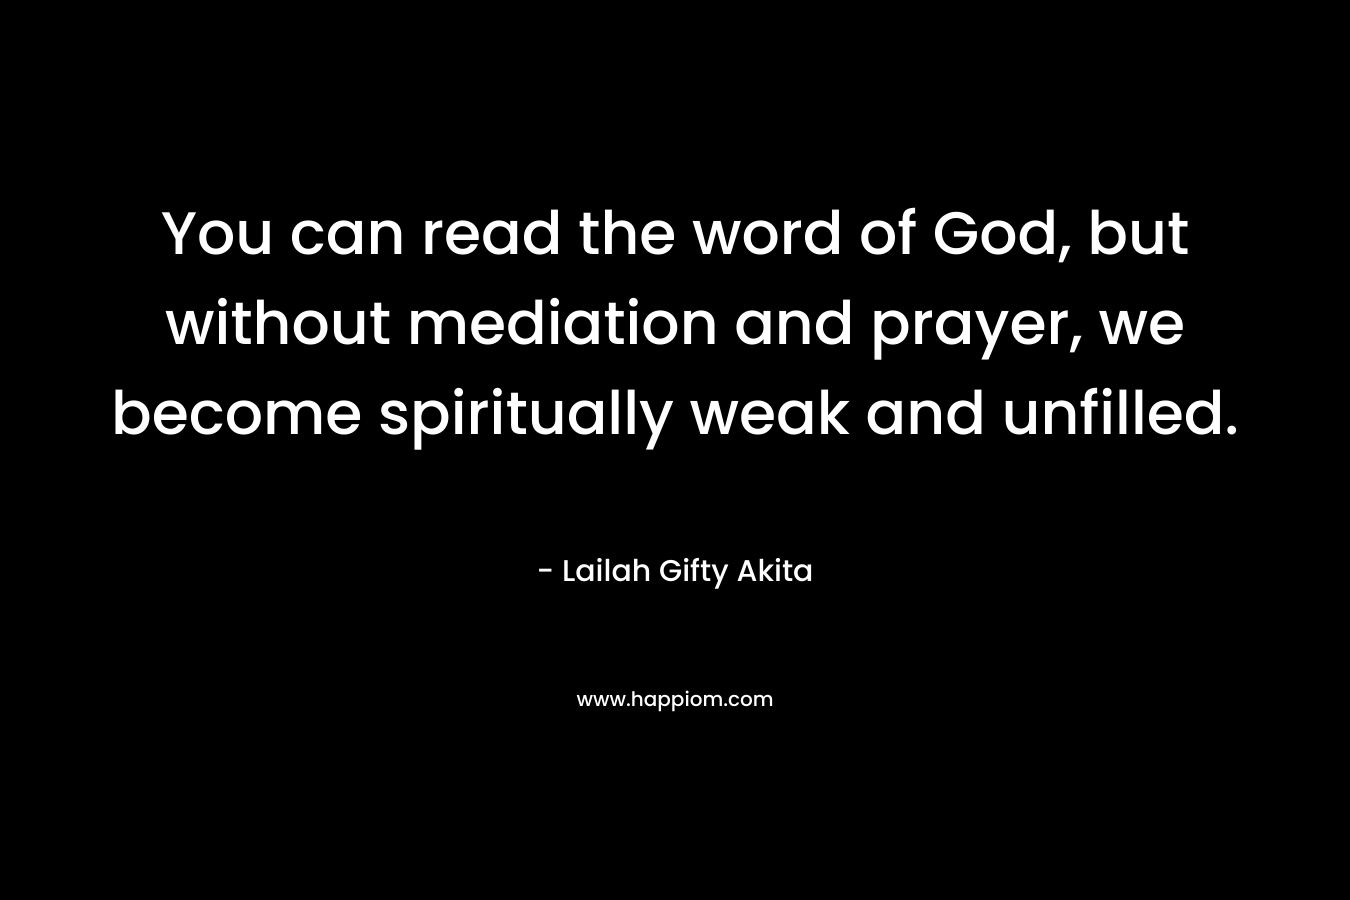 You can read the word of God, but without mediation and prayer, we become spiritually weak and unfilled. – Lailah Gifty Akita